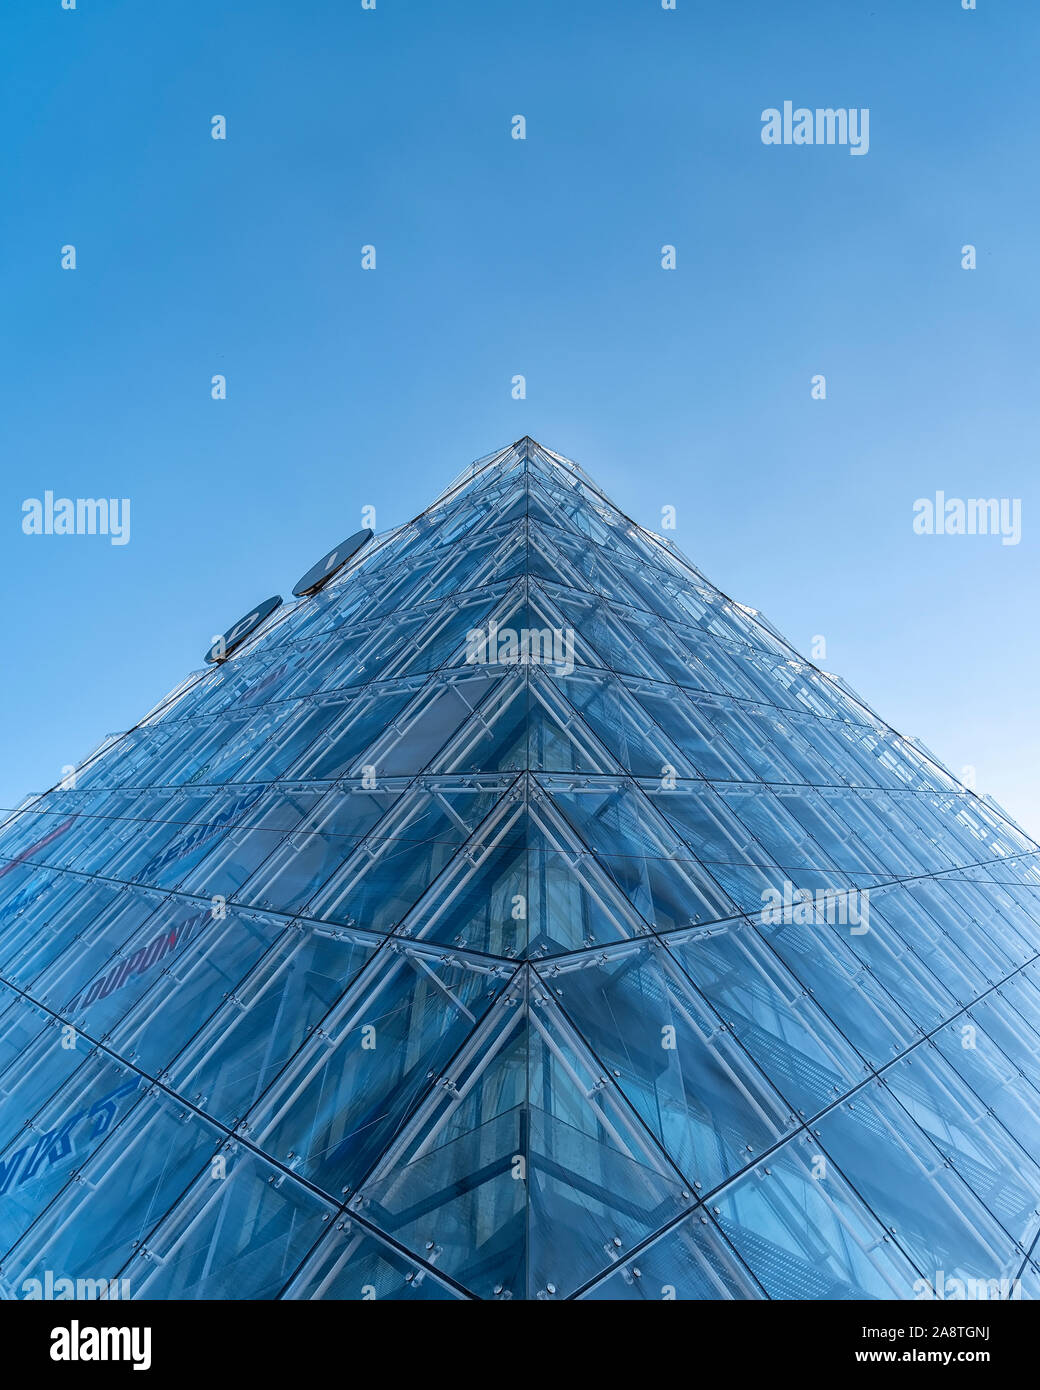 COPENHAGEN, DENMARK - SEPTEMBER 21, 2019: A complex that house varied industries under one roof. A unique architectural design that displays the respe Stock Photo